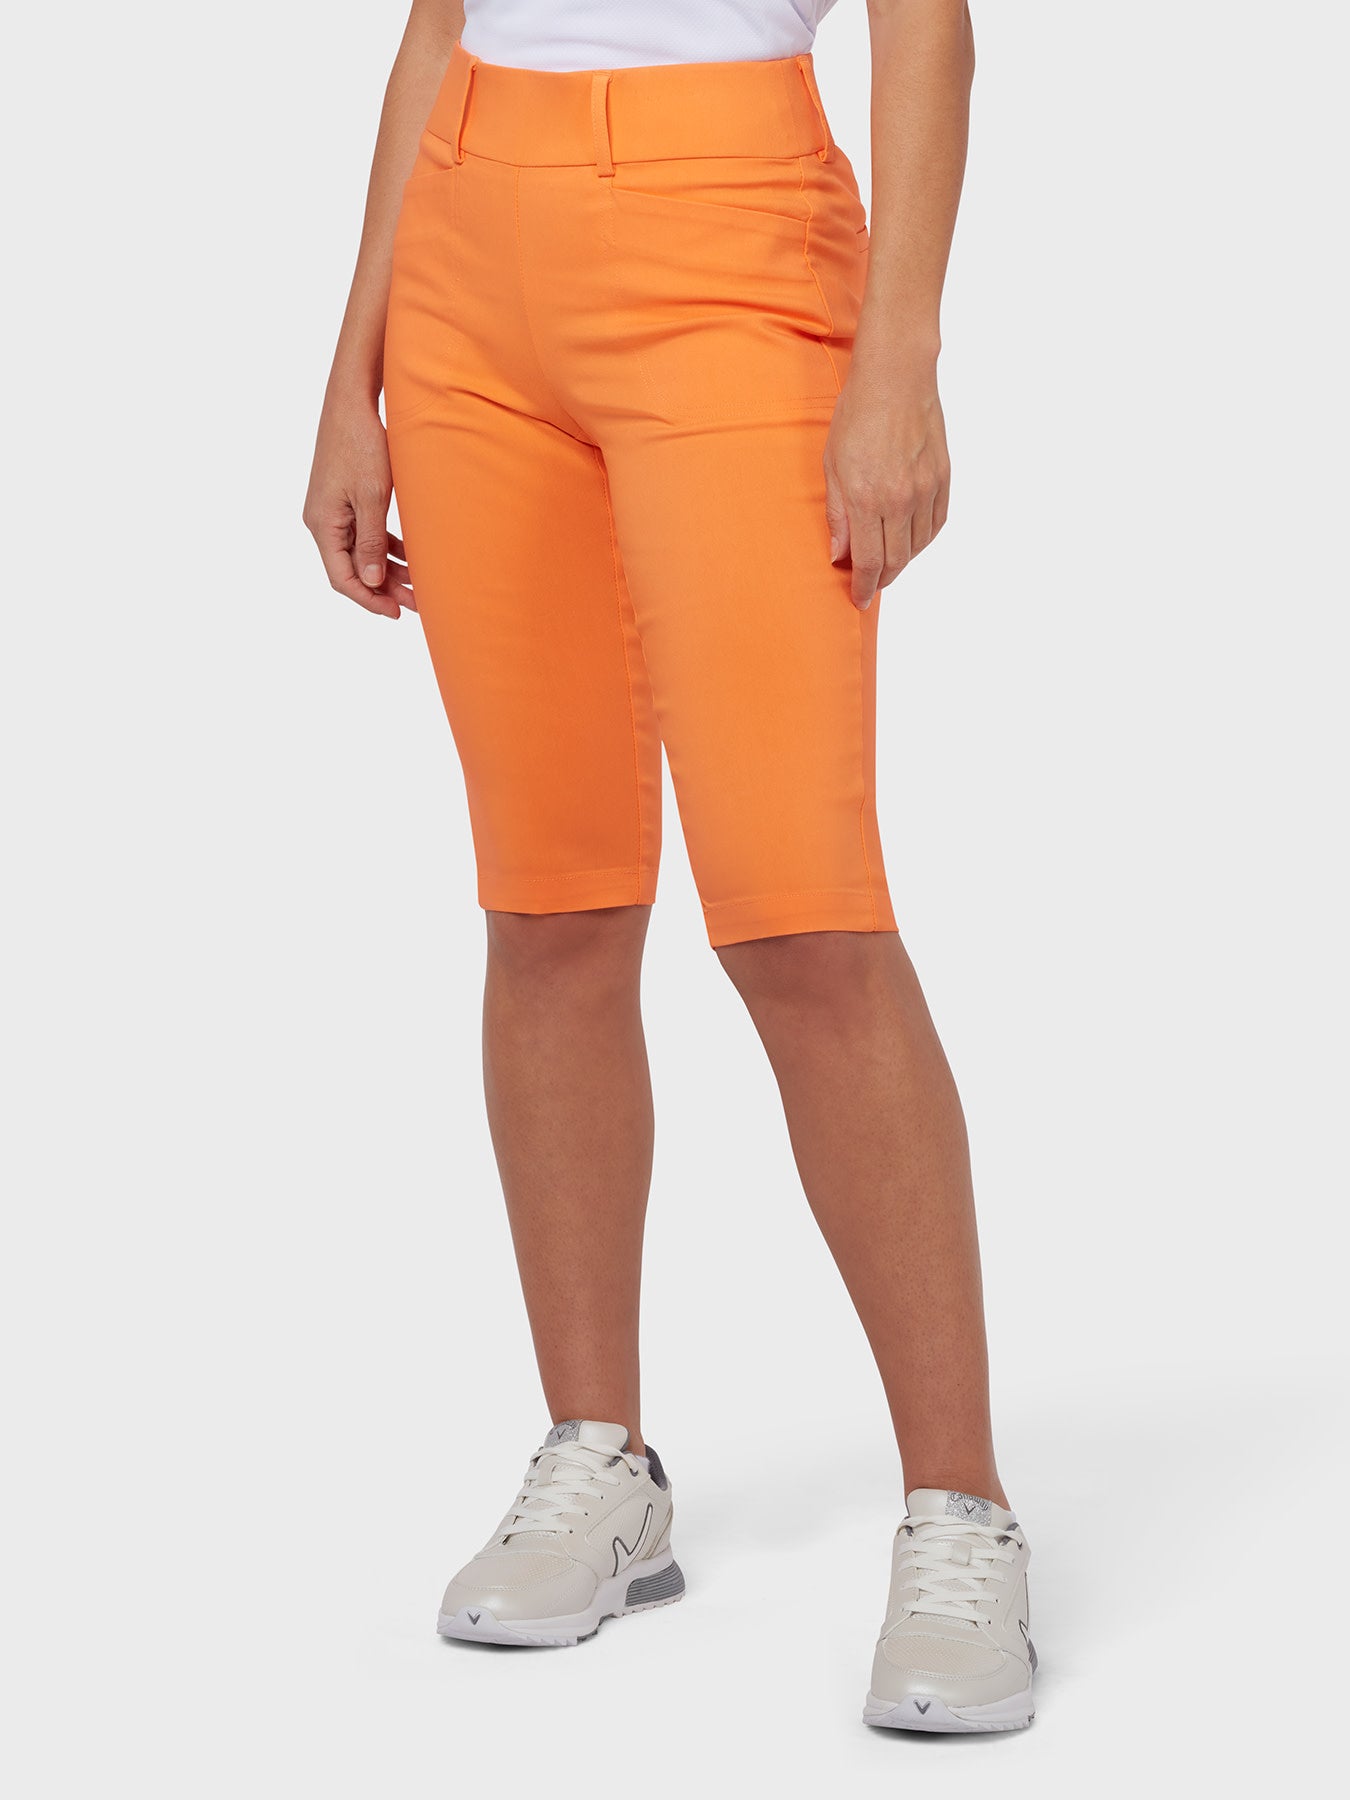 View 34 Truesculpt Womens Shorts In Nectarine information